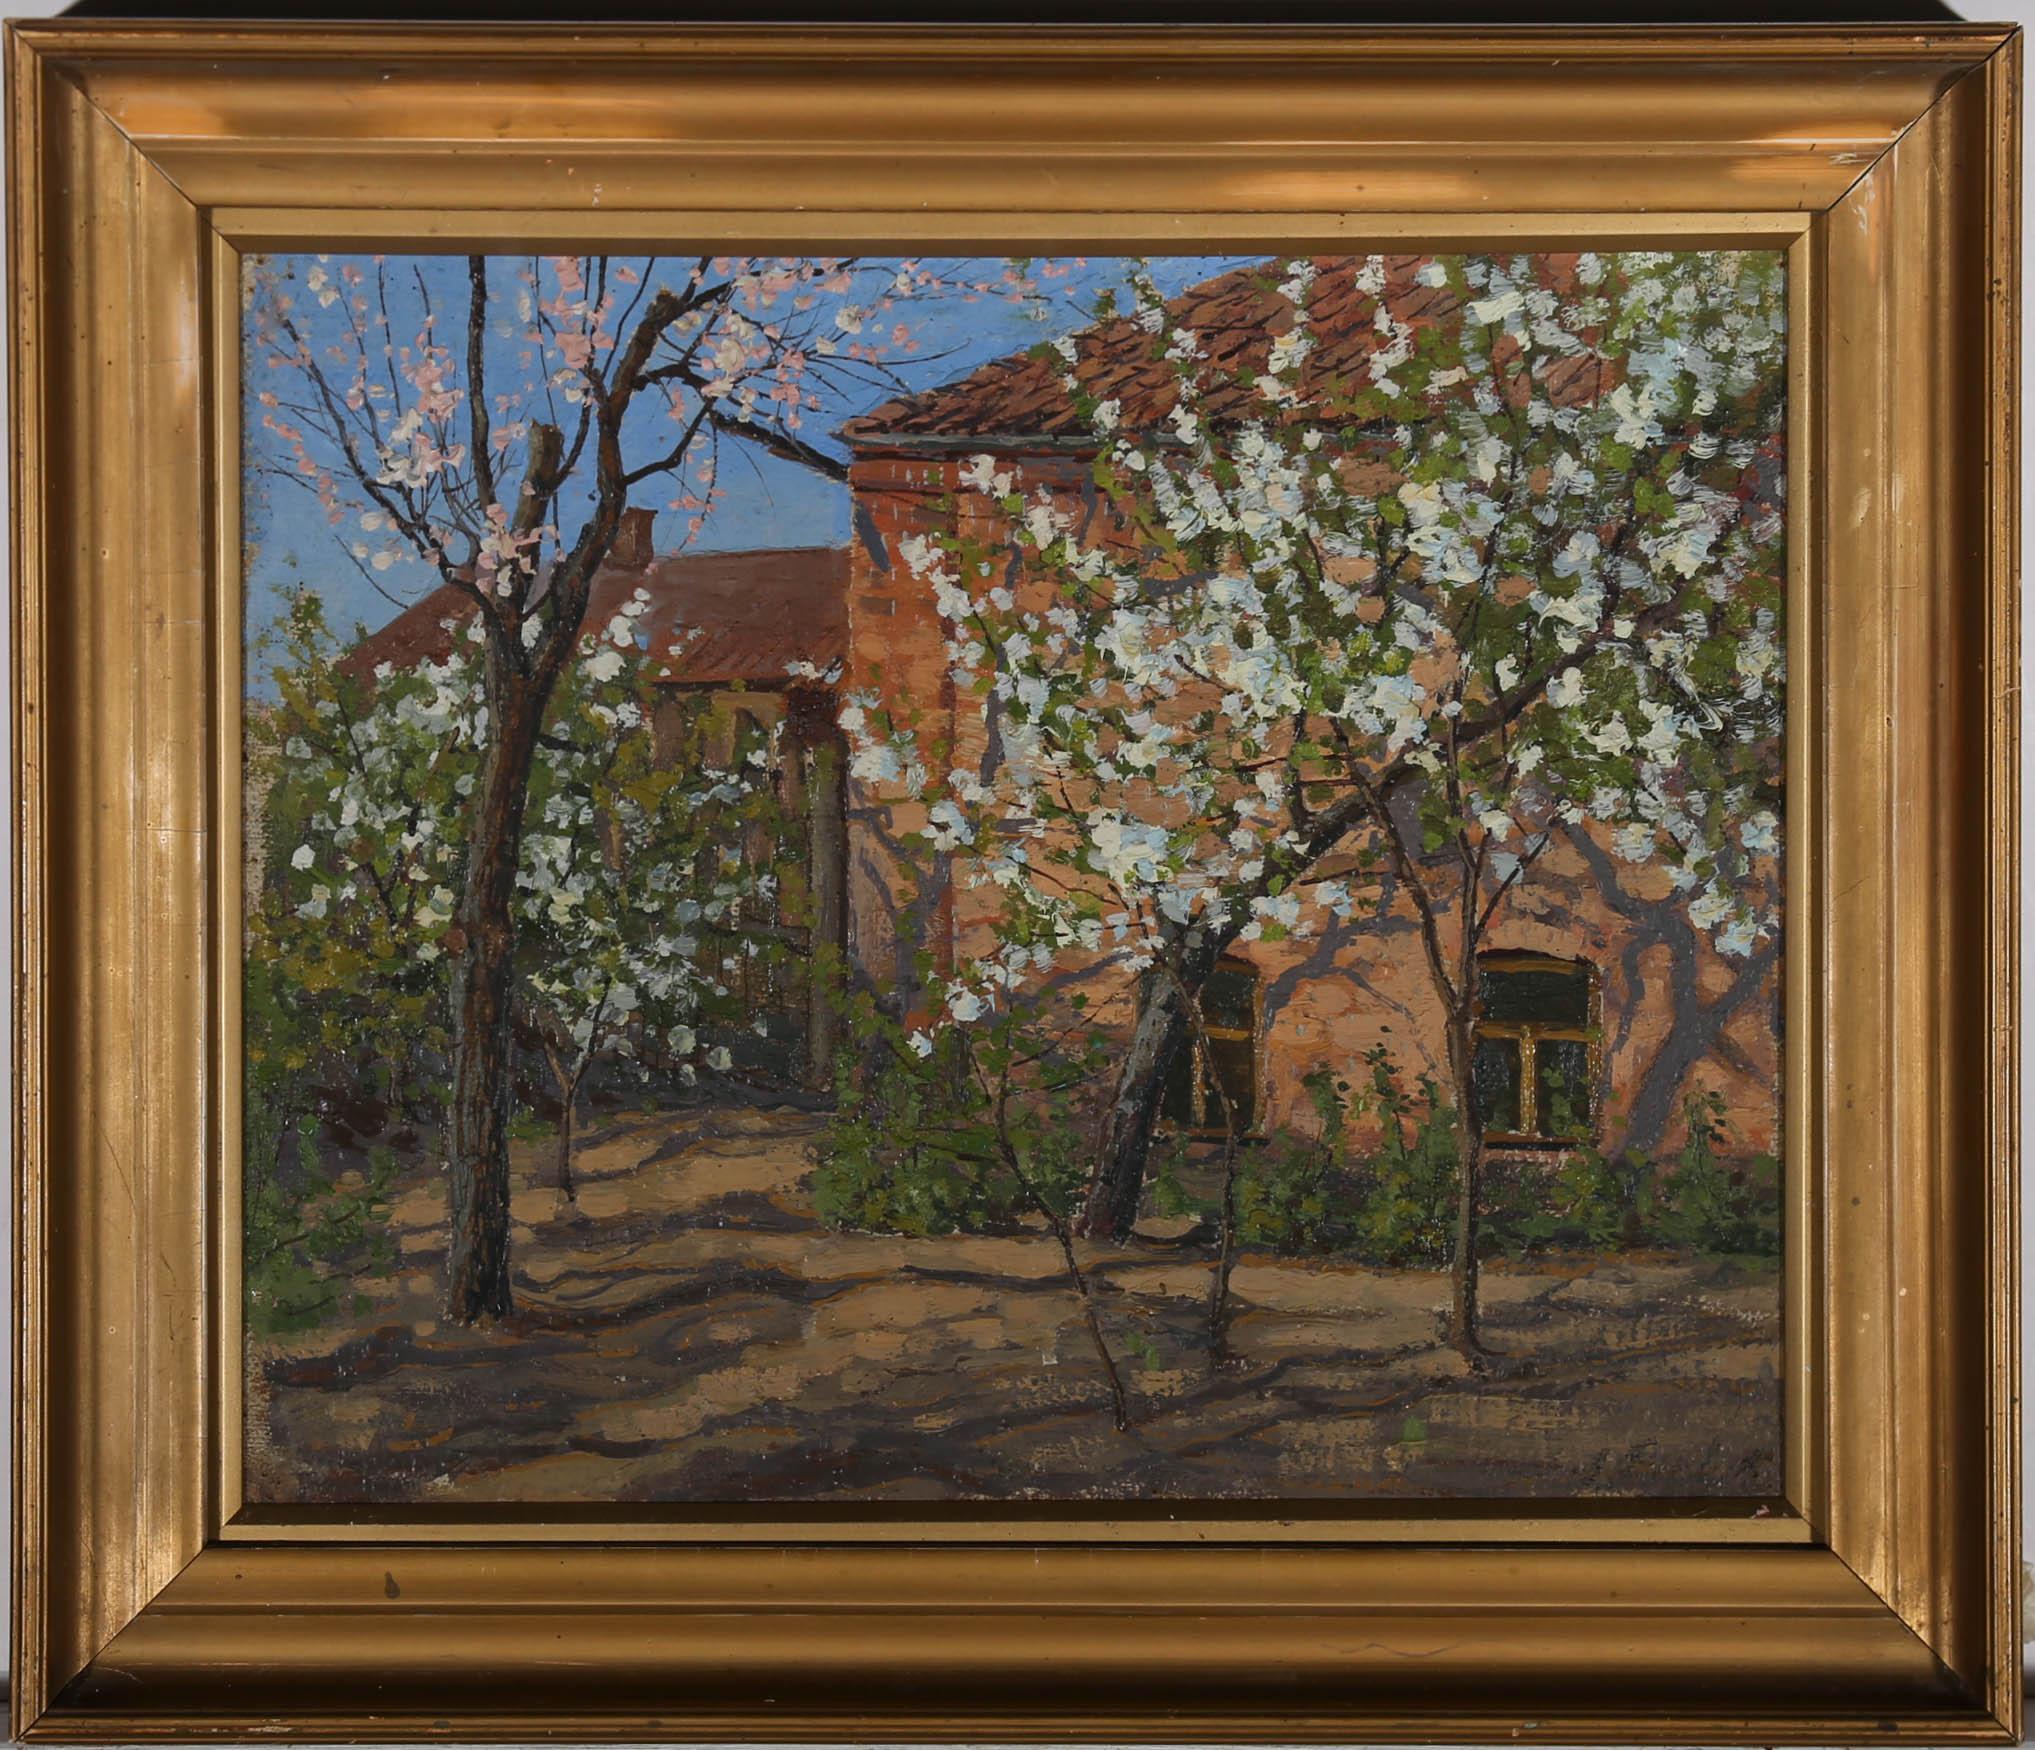 Unknown Landscape Painting - Framed Mid 20th Century Oil - Cherry Trees in Blossom